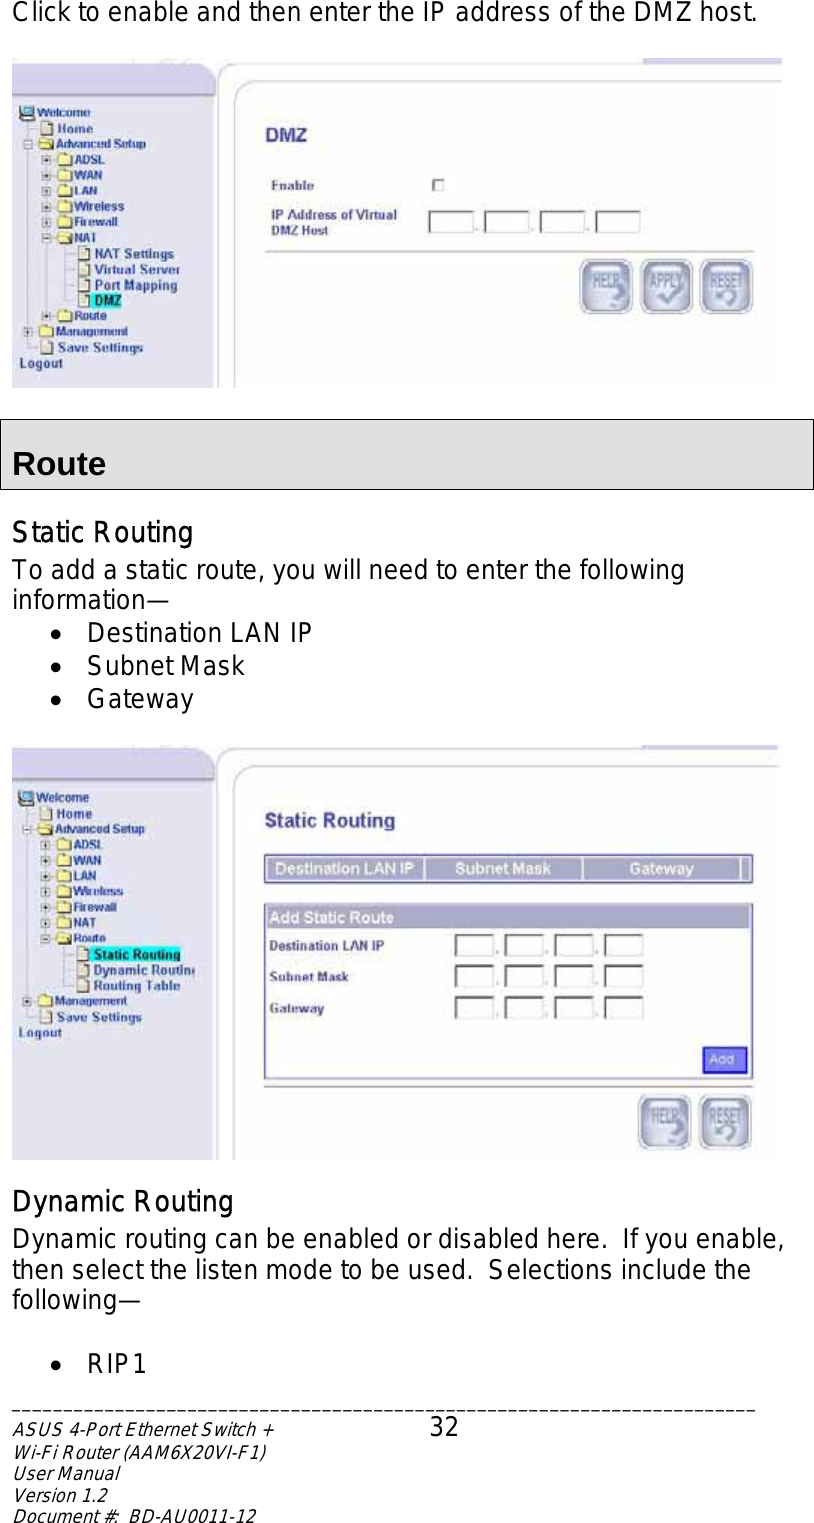 Click to enable and then enter the IP address of the DMZ host.    Route Static Routing To add a static route, you will need to enter the following information— •  Destination LAN IP •  Subnet Mask •  Gateway   Dynamic Routing Dynamic routing can be enabled or disabled here.  If you enable, then select the listen mode to be used.  Selections include the following—  •  RIP1 ________________________________________________________________________ASUS 4-Port Ethernet Switch +  32 Wi-Fi Router (AAM6X20VI-F1) User Manual                                                                         Version 1.2 Document #:  BD-AU0011-12  